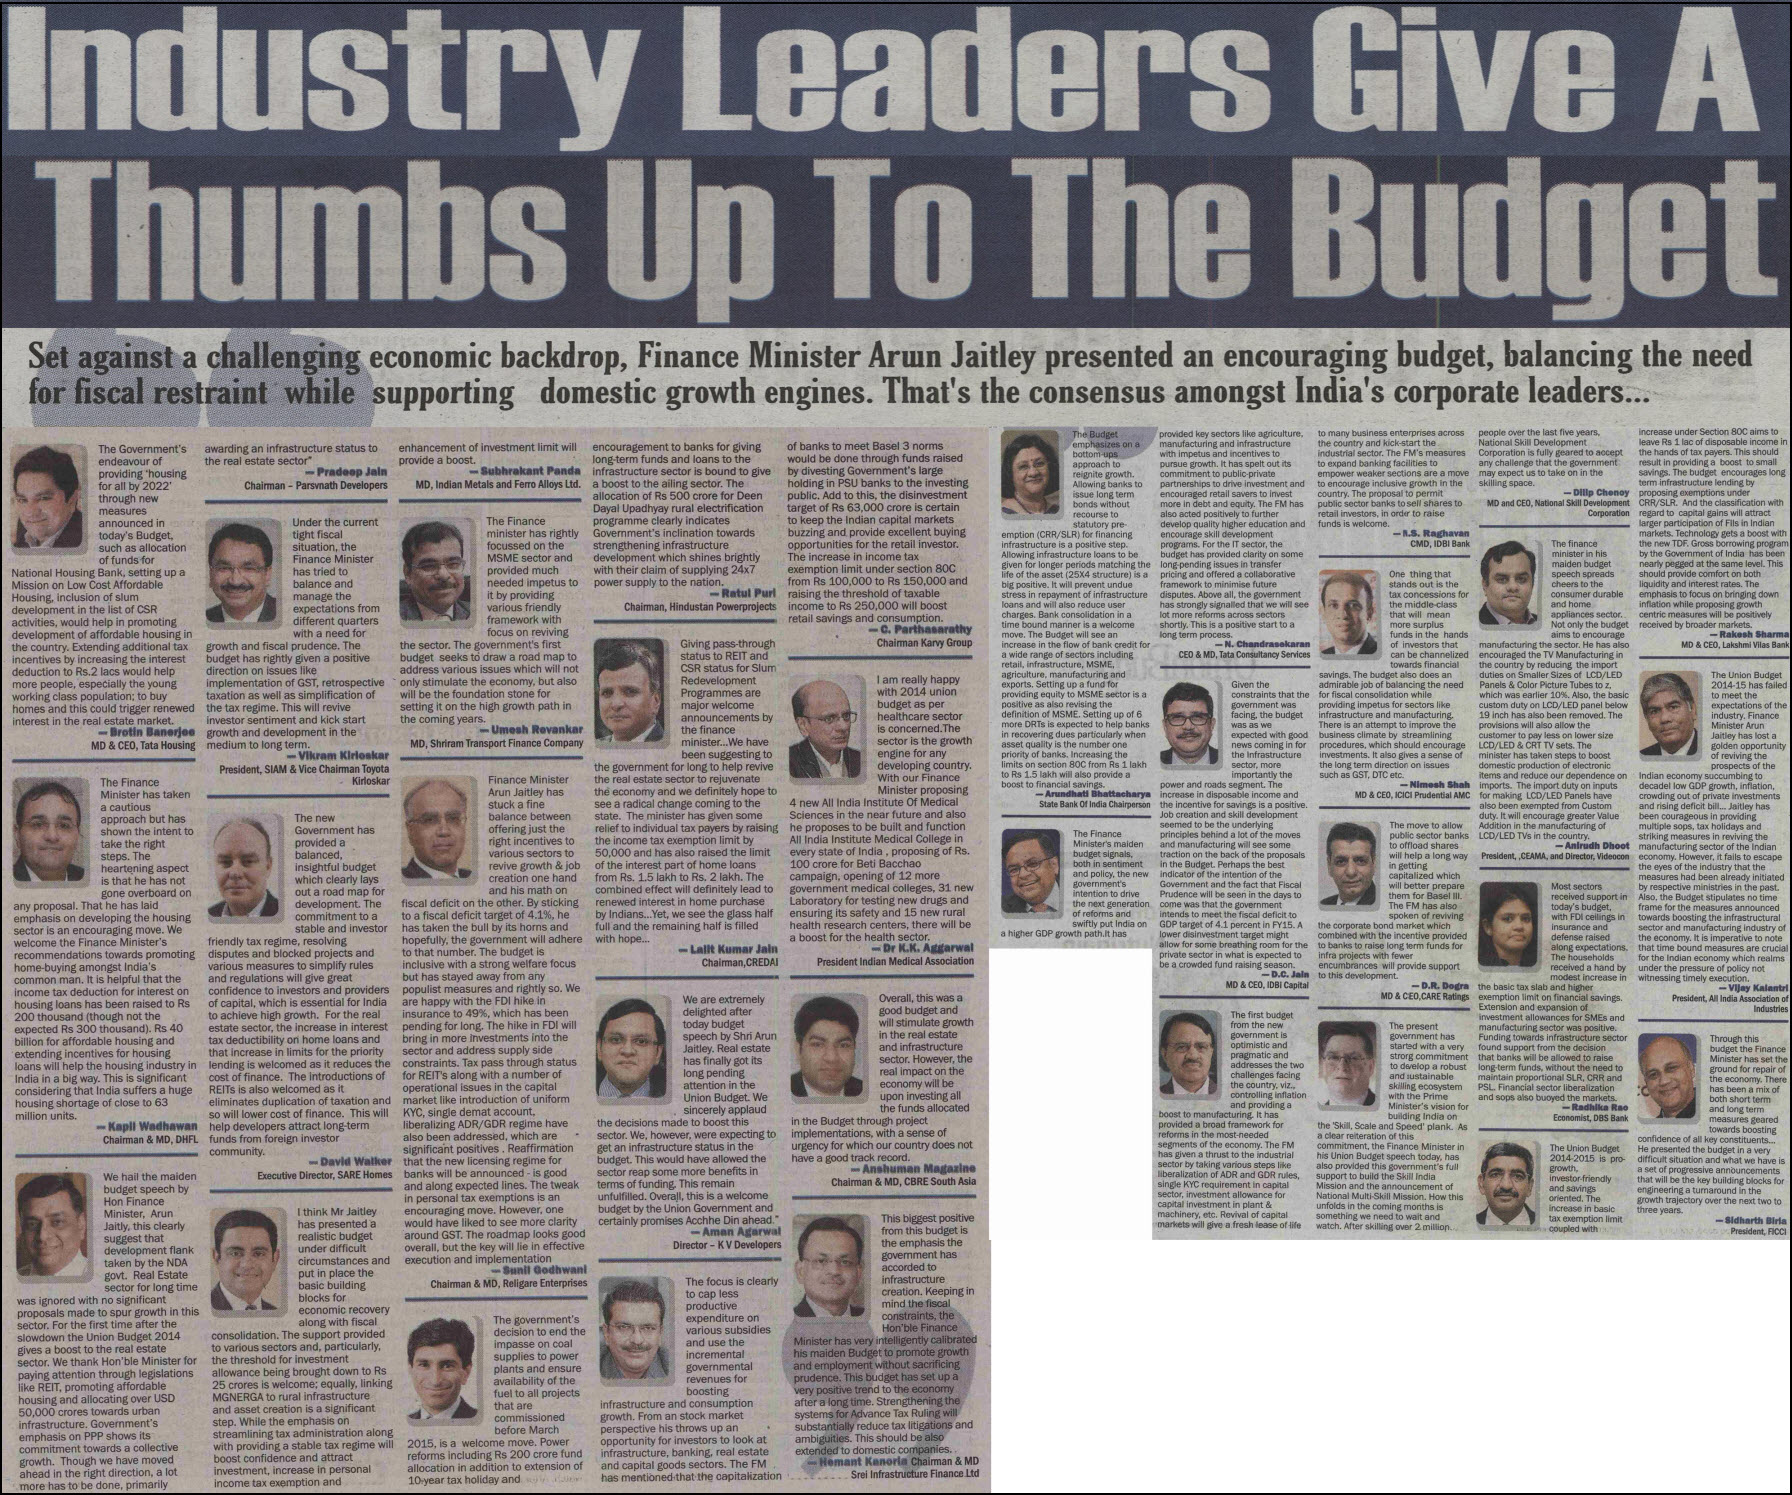 Industry leaders give a thumbs up to the budget